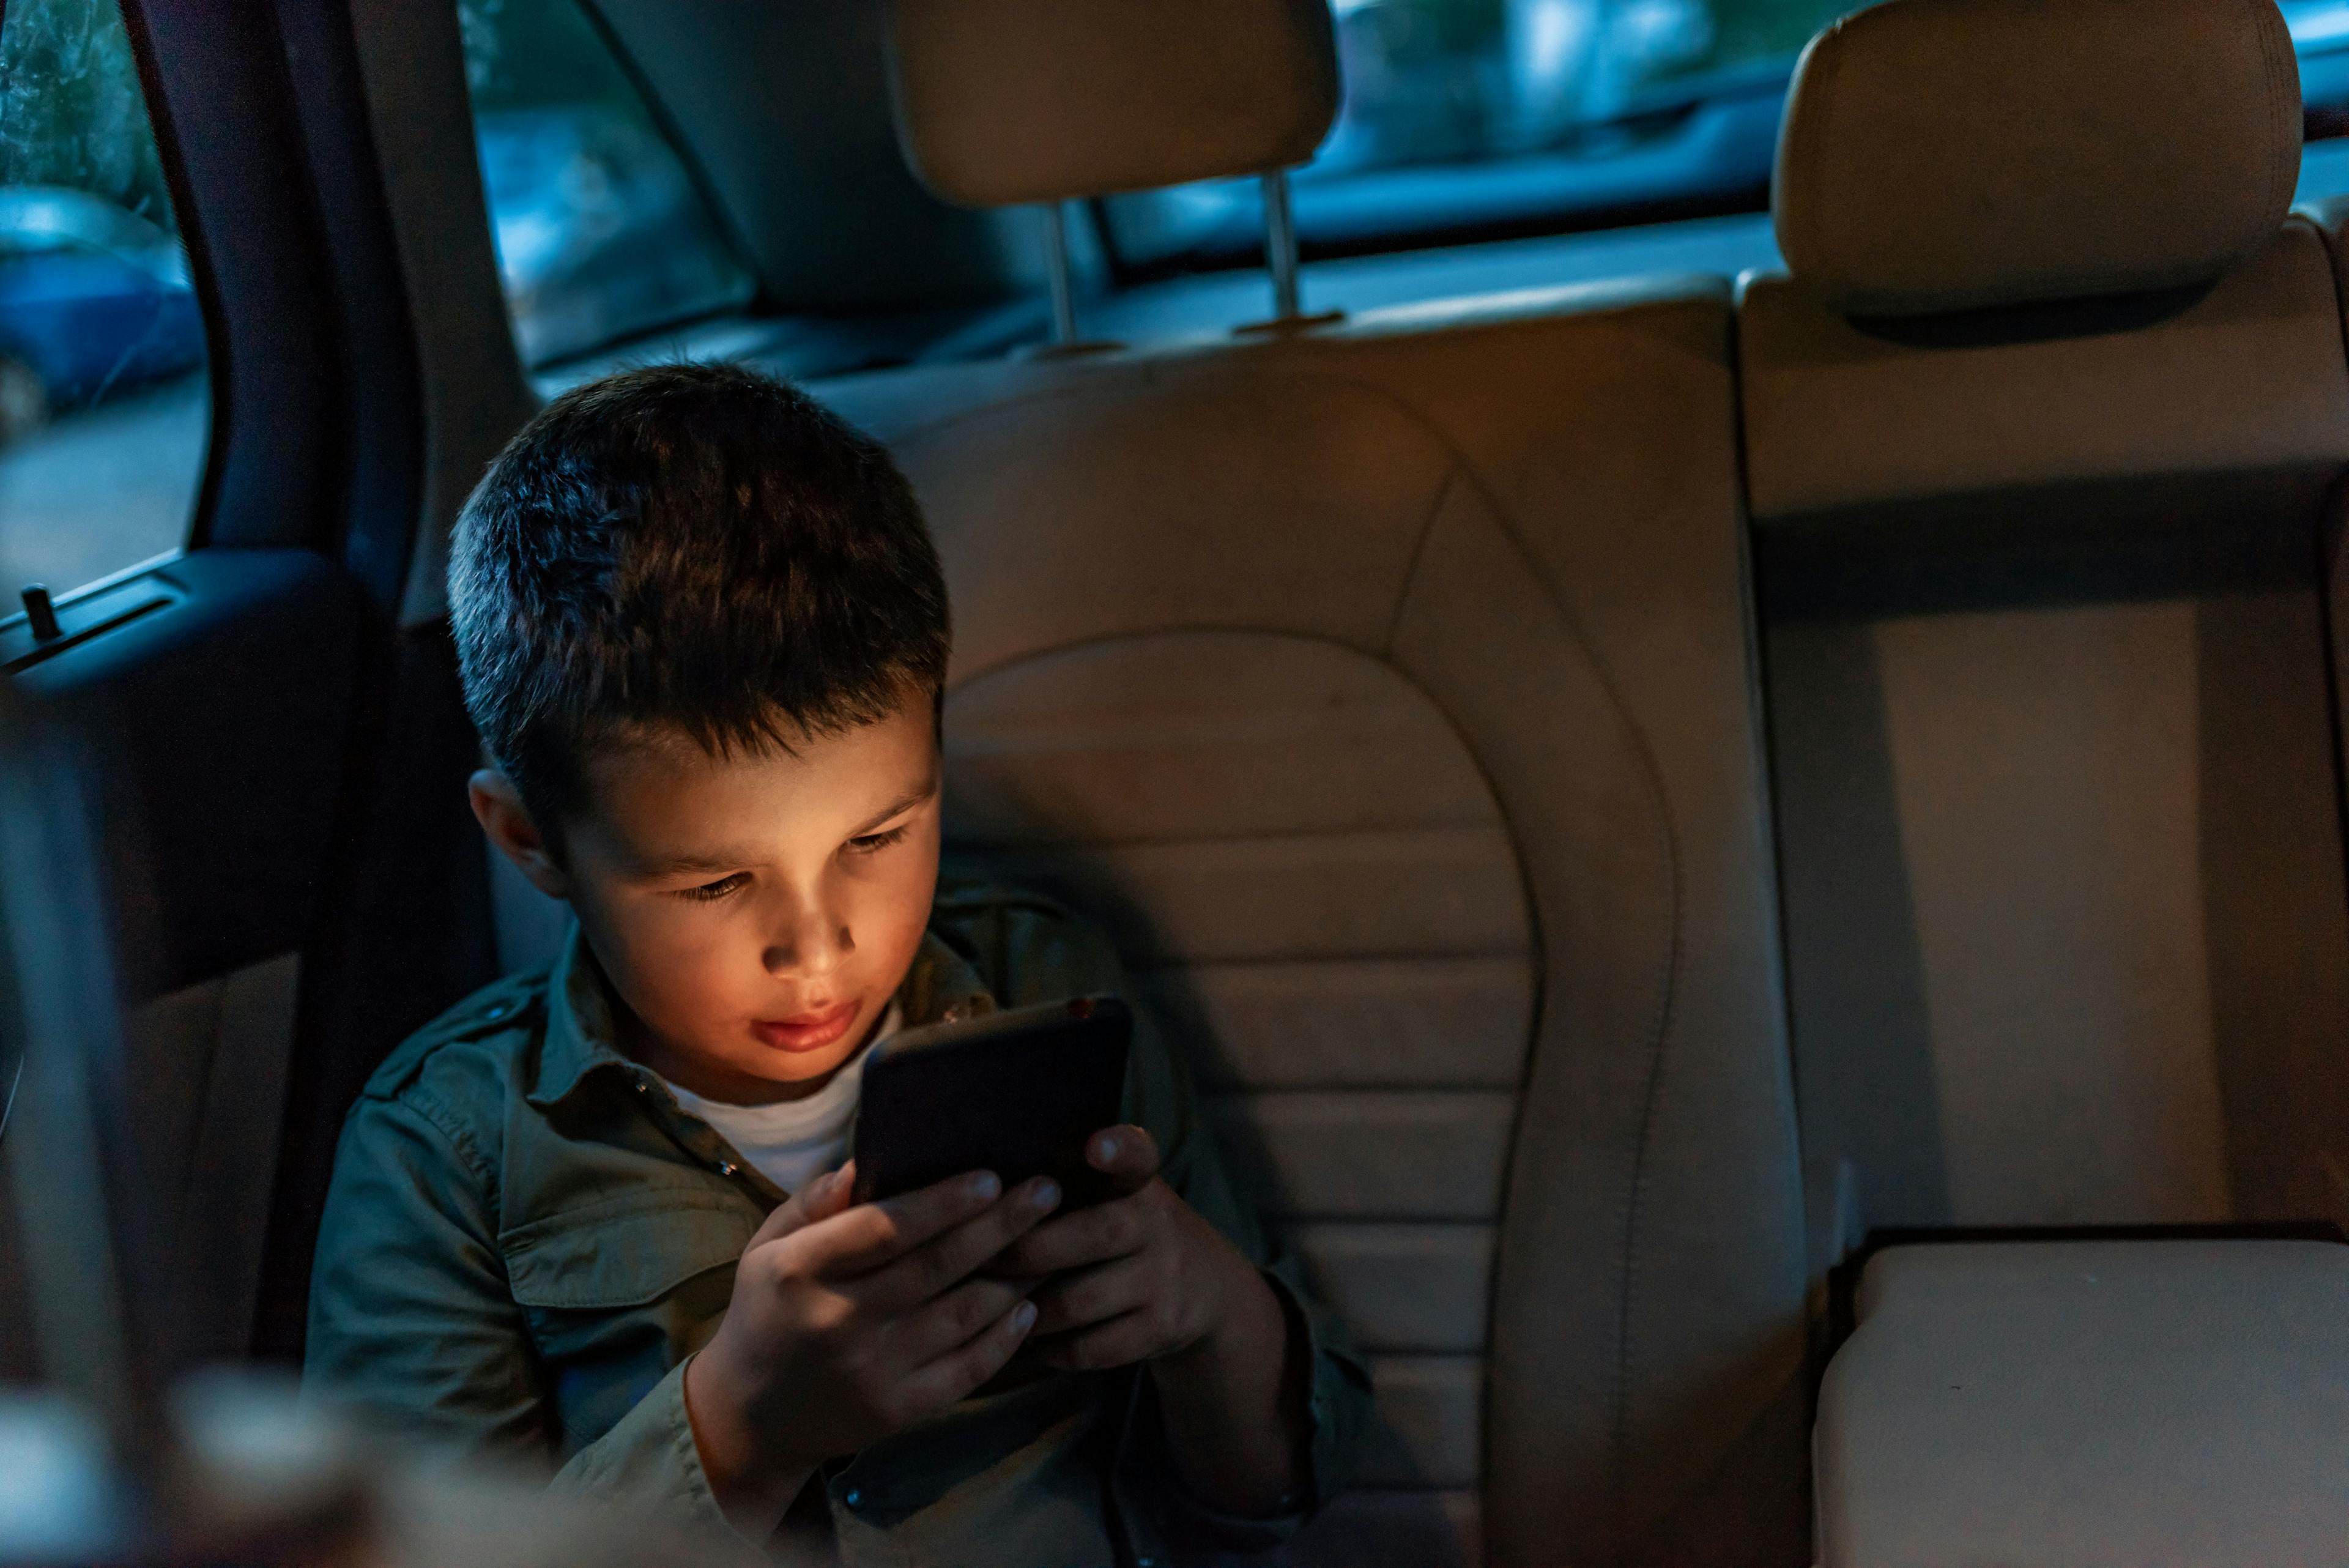 A child in a car looks at a smartphone. 